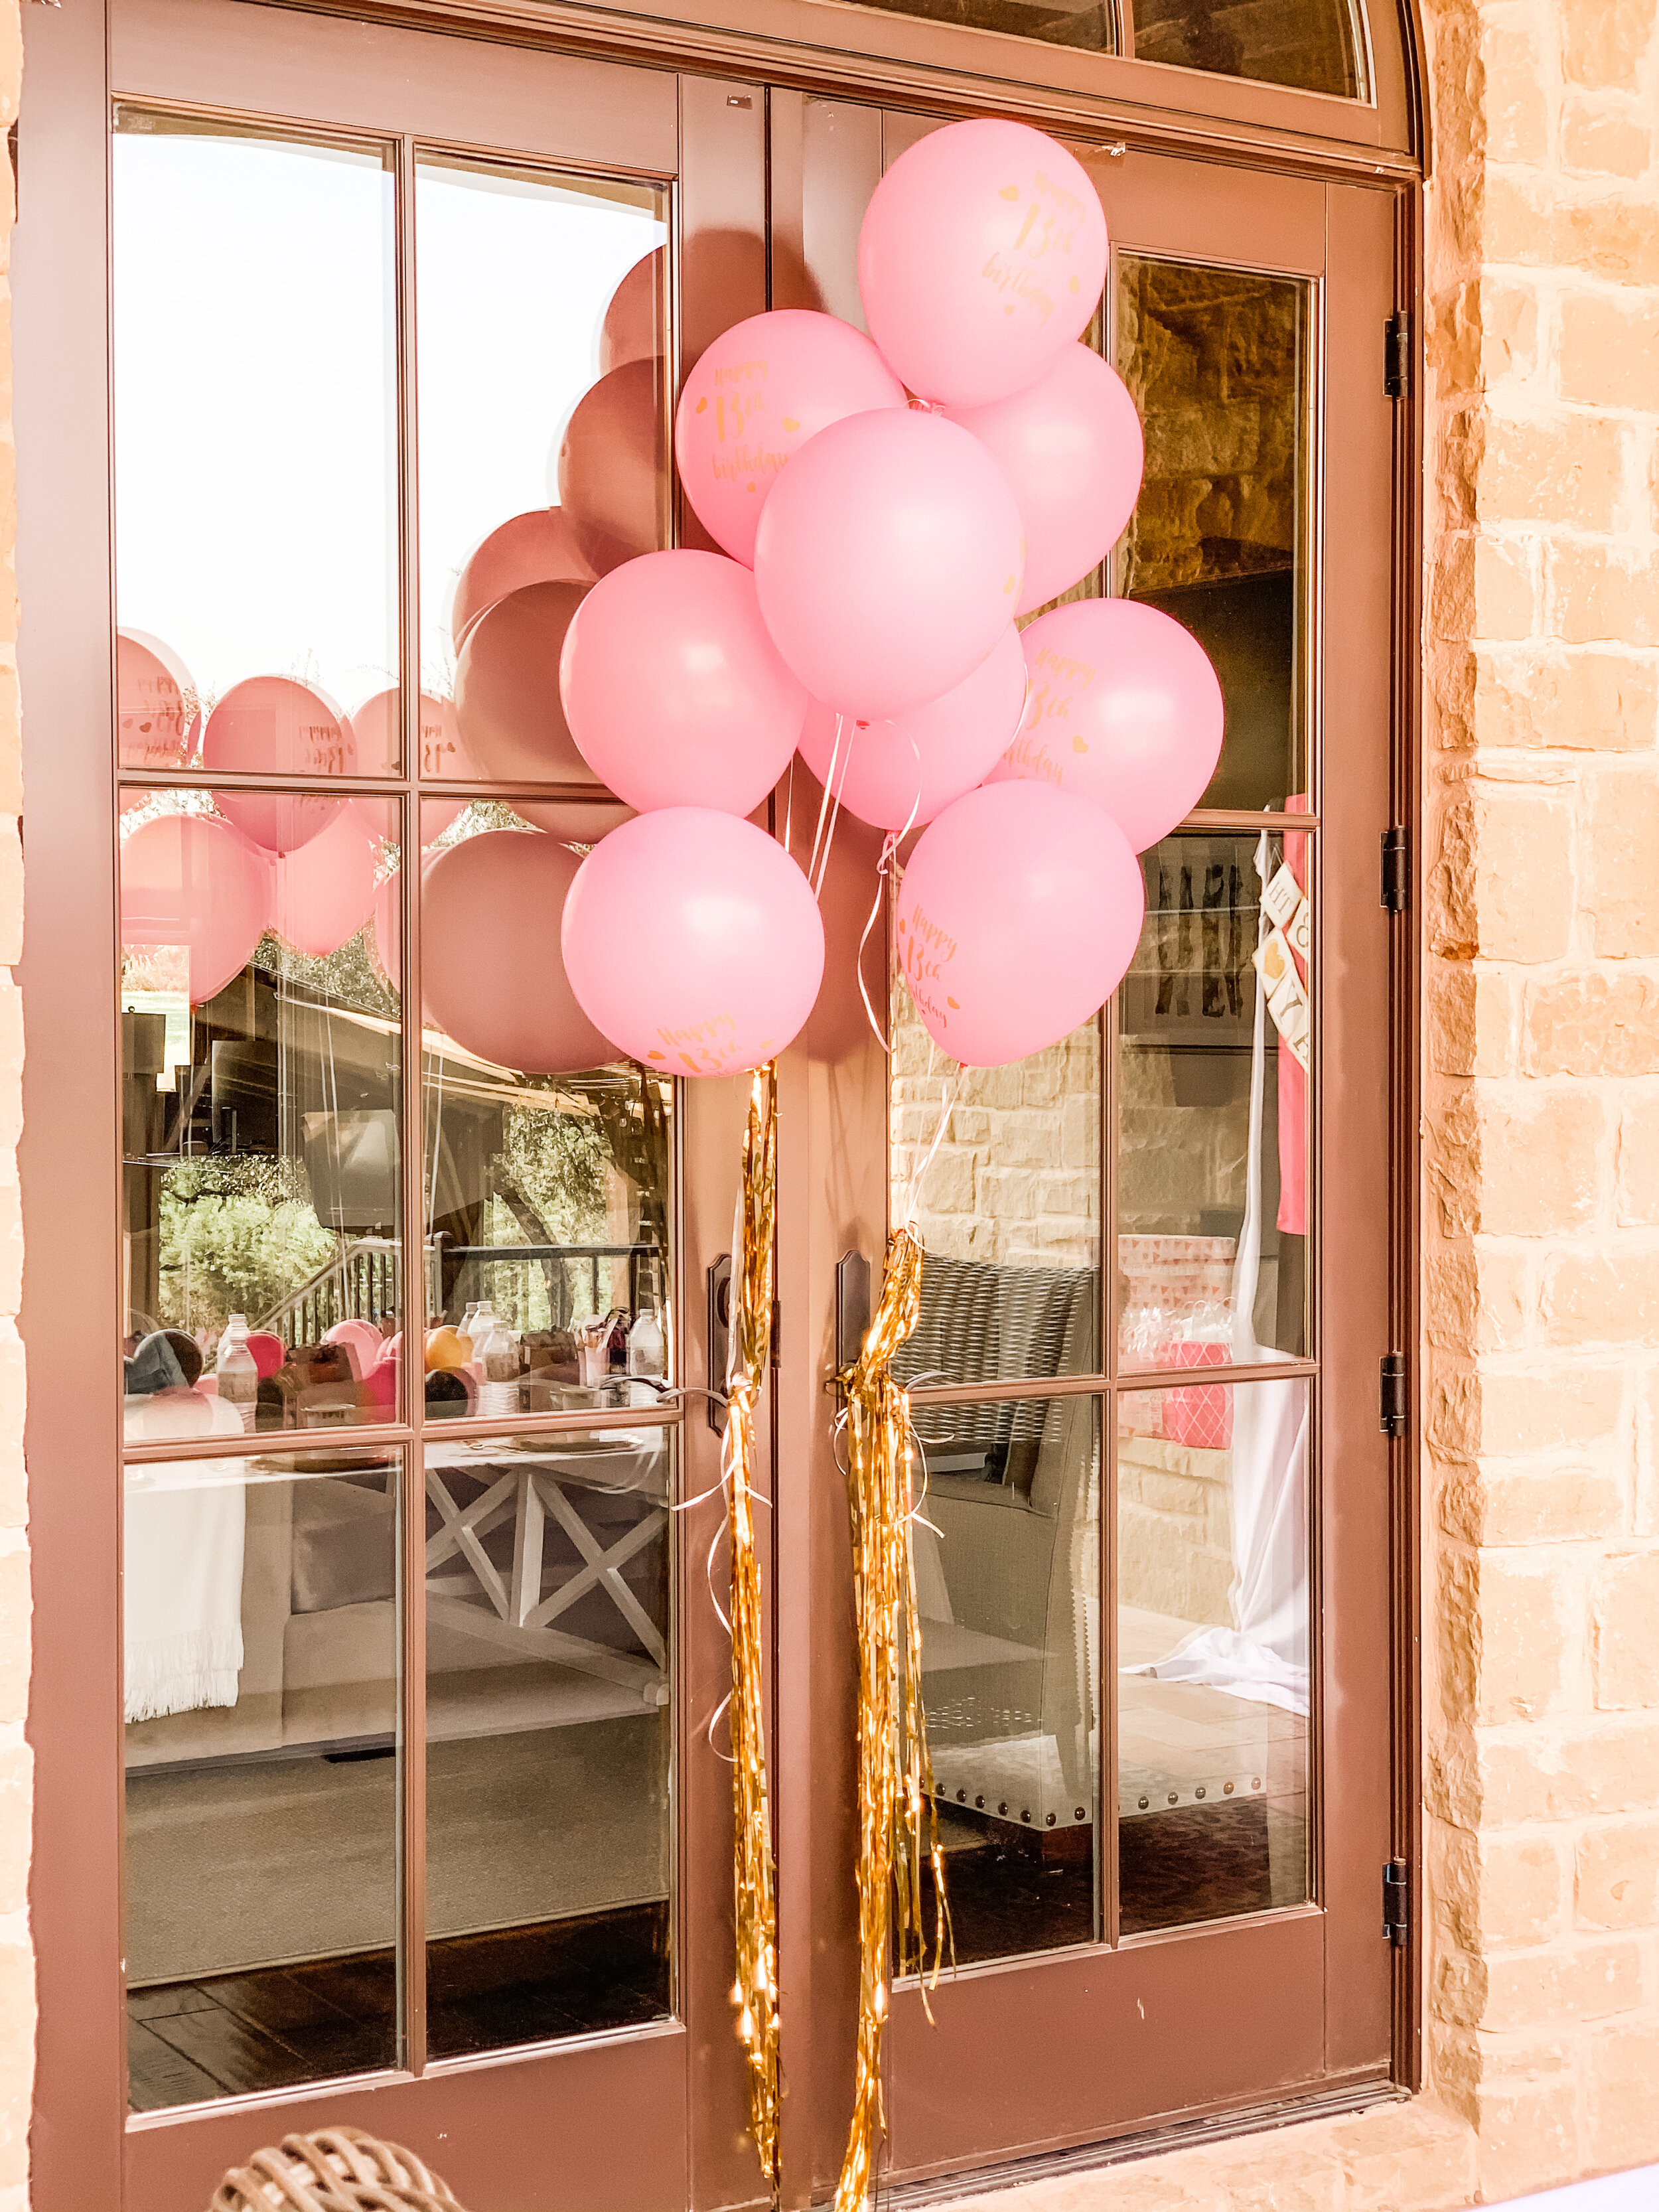 Pink and gold balloon details for a Glamorous Teen Birthday Party - get more details and party inspiration on minteventdesign.com!